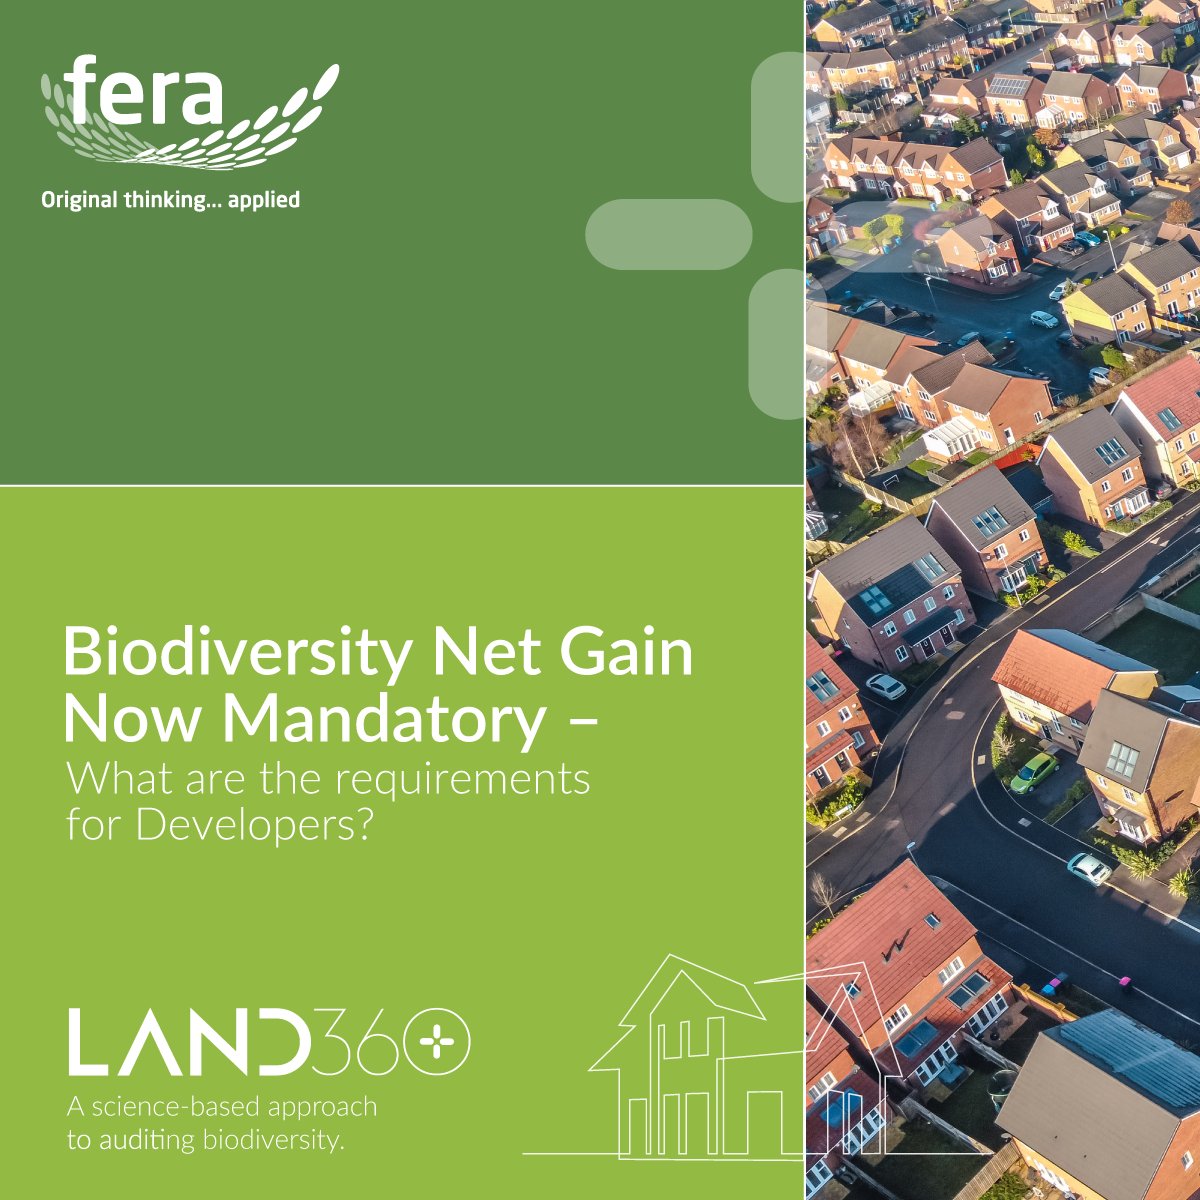 Biodiversity net gain becomes mandatory 🌿 From today, all major developments must achieve a 10% Biodiversity Net Gain. Read about what this might mean for you: hubs.ly/Q02kGhxt0 #LAND360 #BNG #SustainableDevelopment #BiodiversityInConstruction